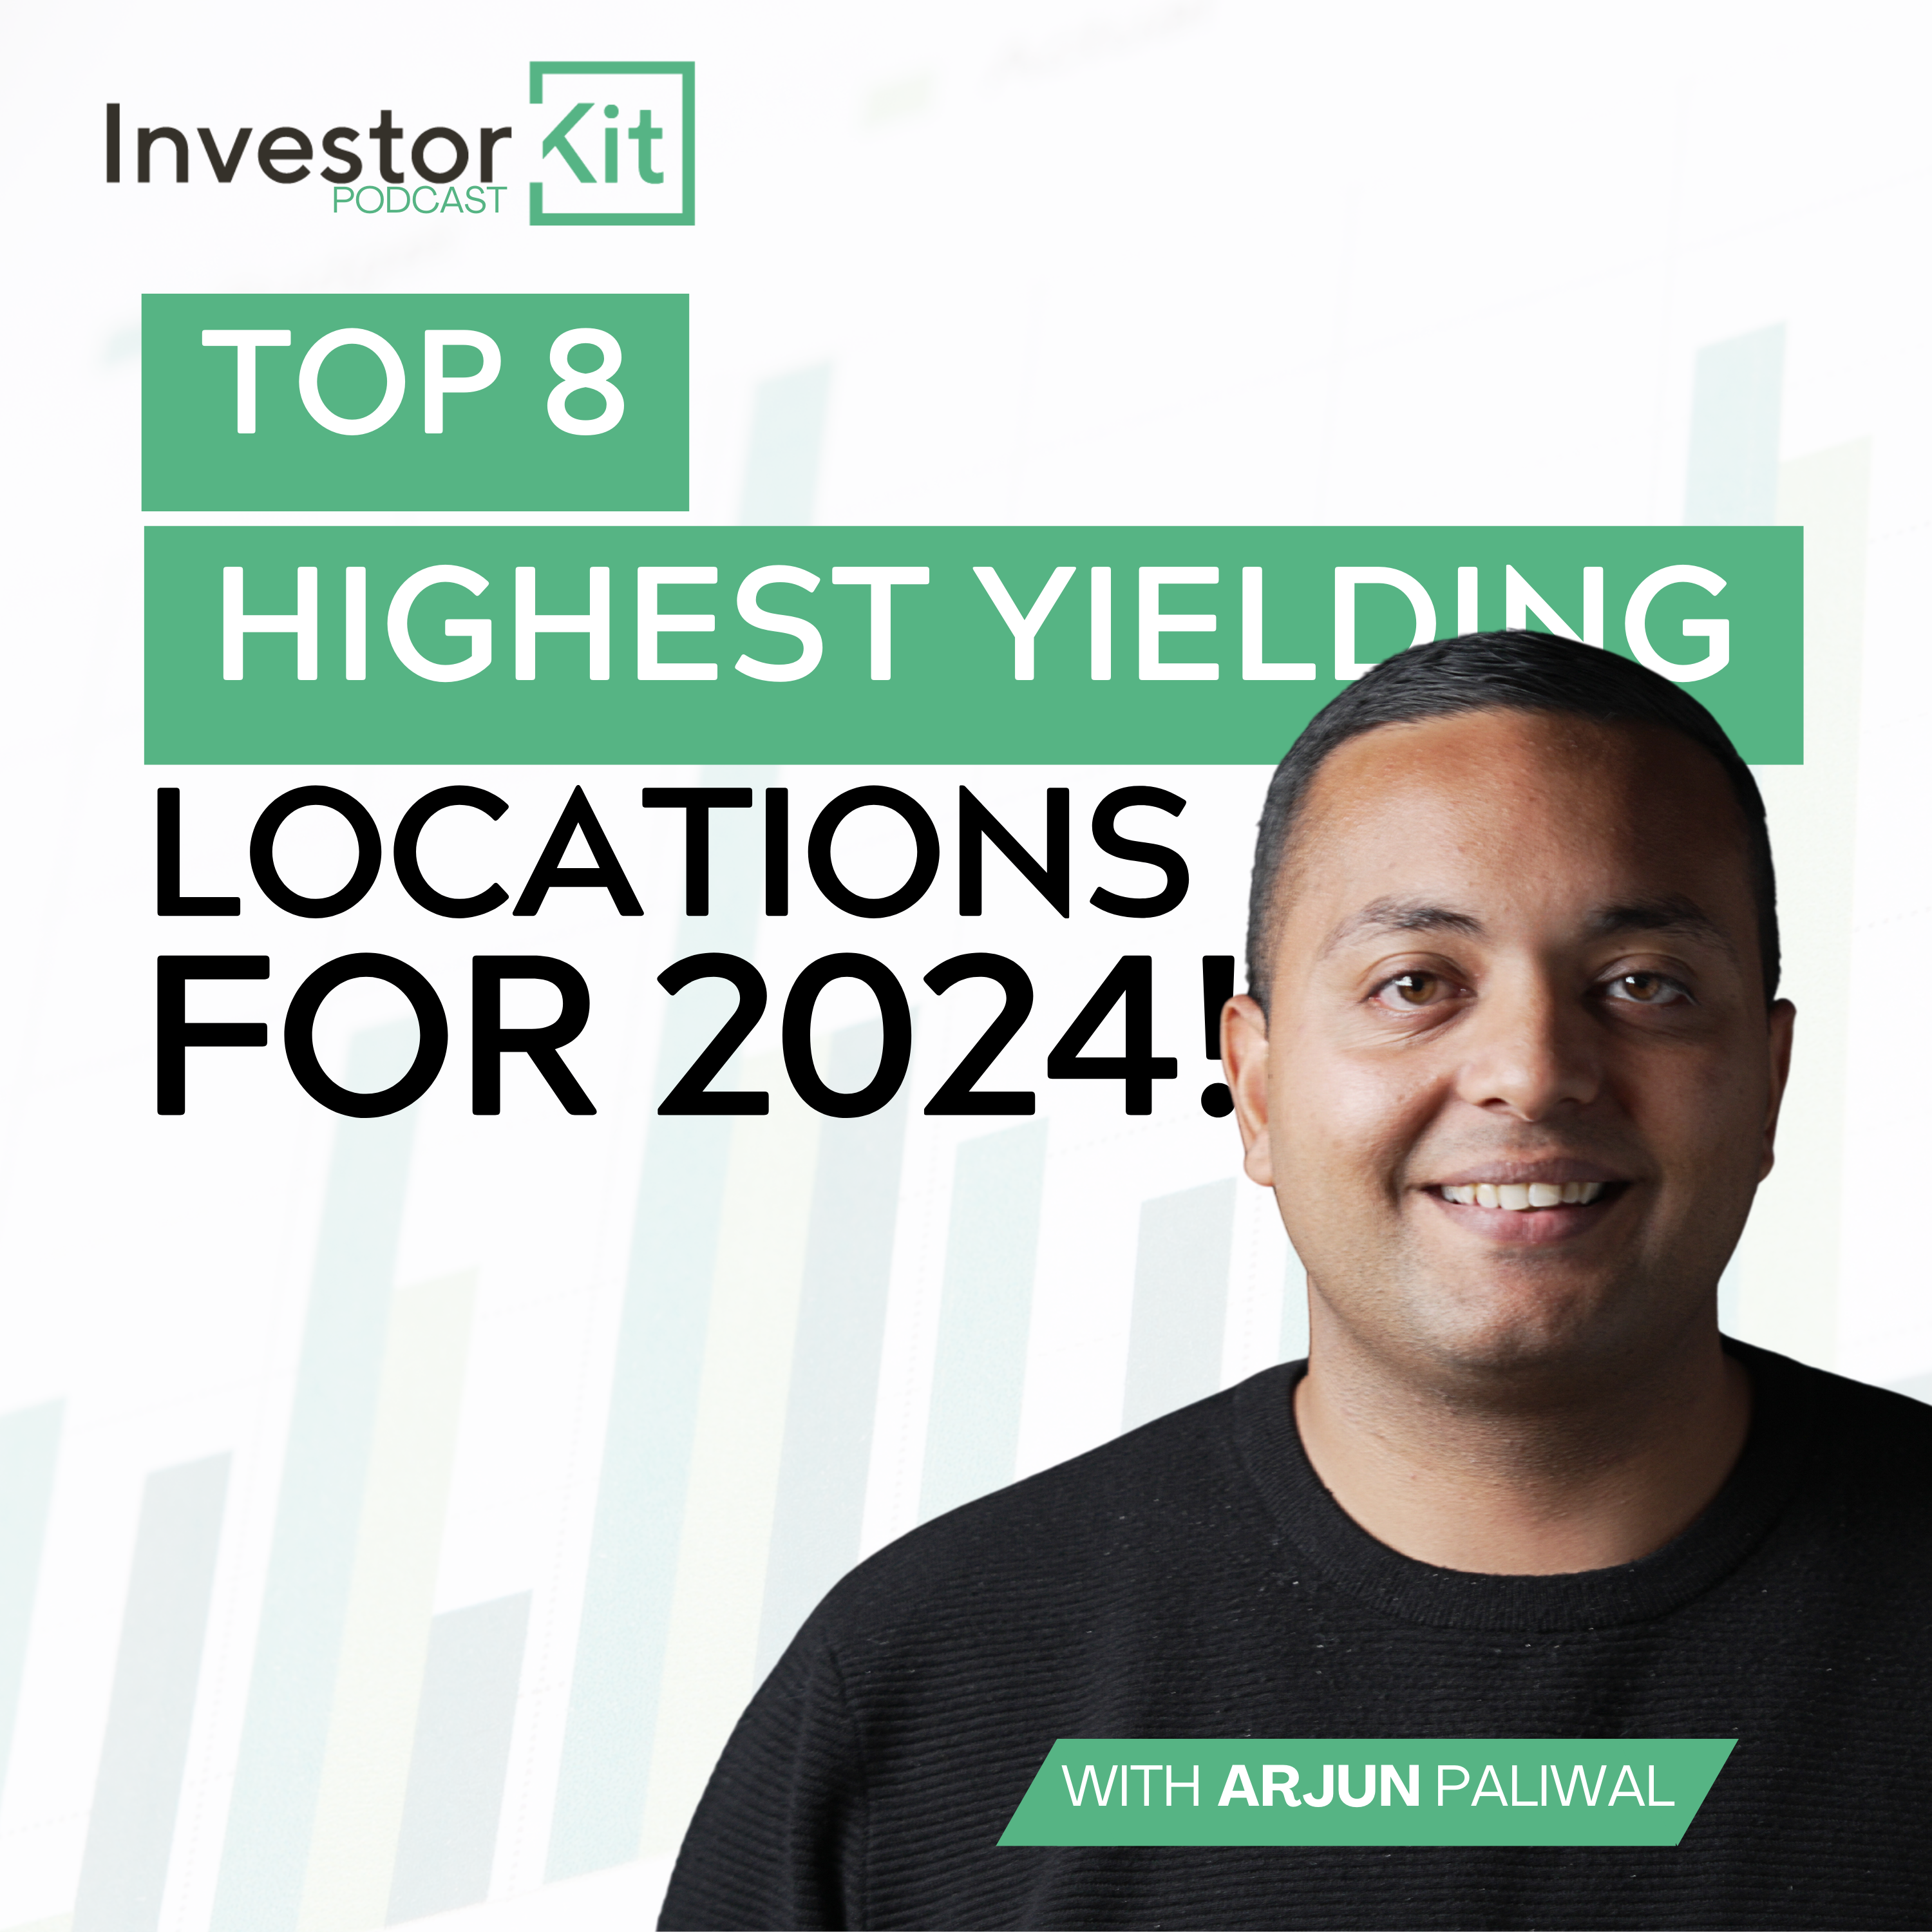 Top 8 Highest Yielding Locations in Australia! Where to Find High Cashflow Properties?